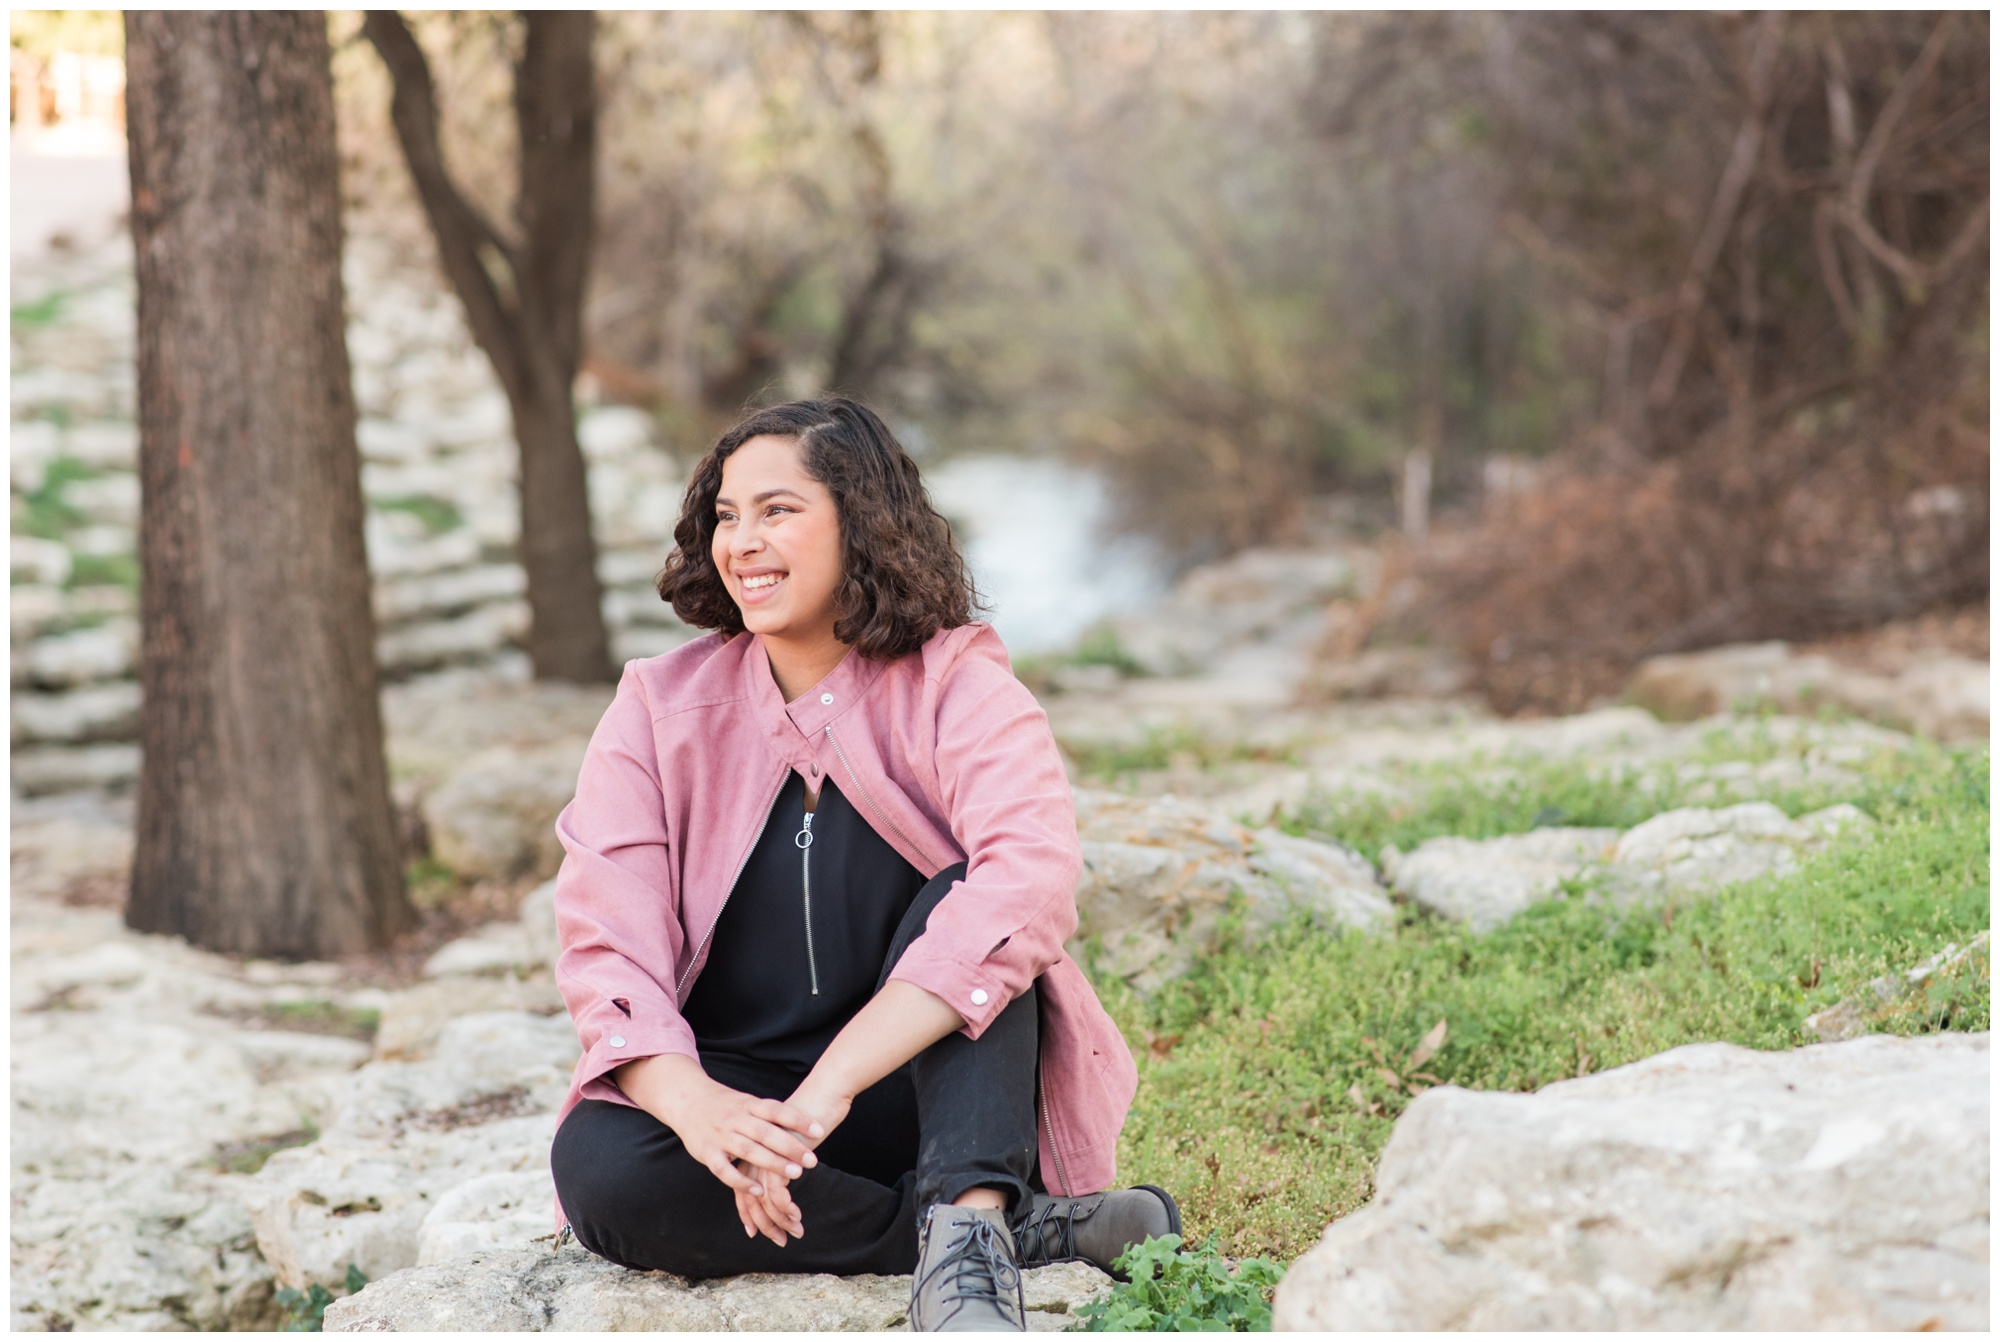 Fort Worth Stockyards Senior Session | Fort Worth Stockyards | Fort Worth Senior Photographer | Lauren Grimes Photography